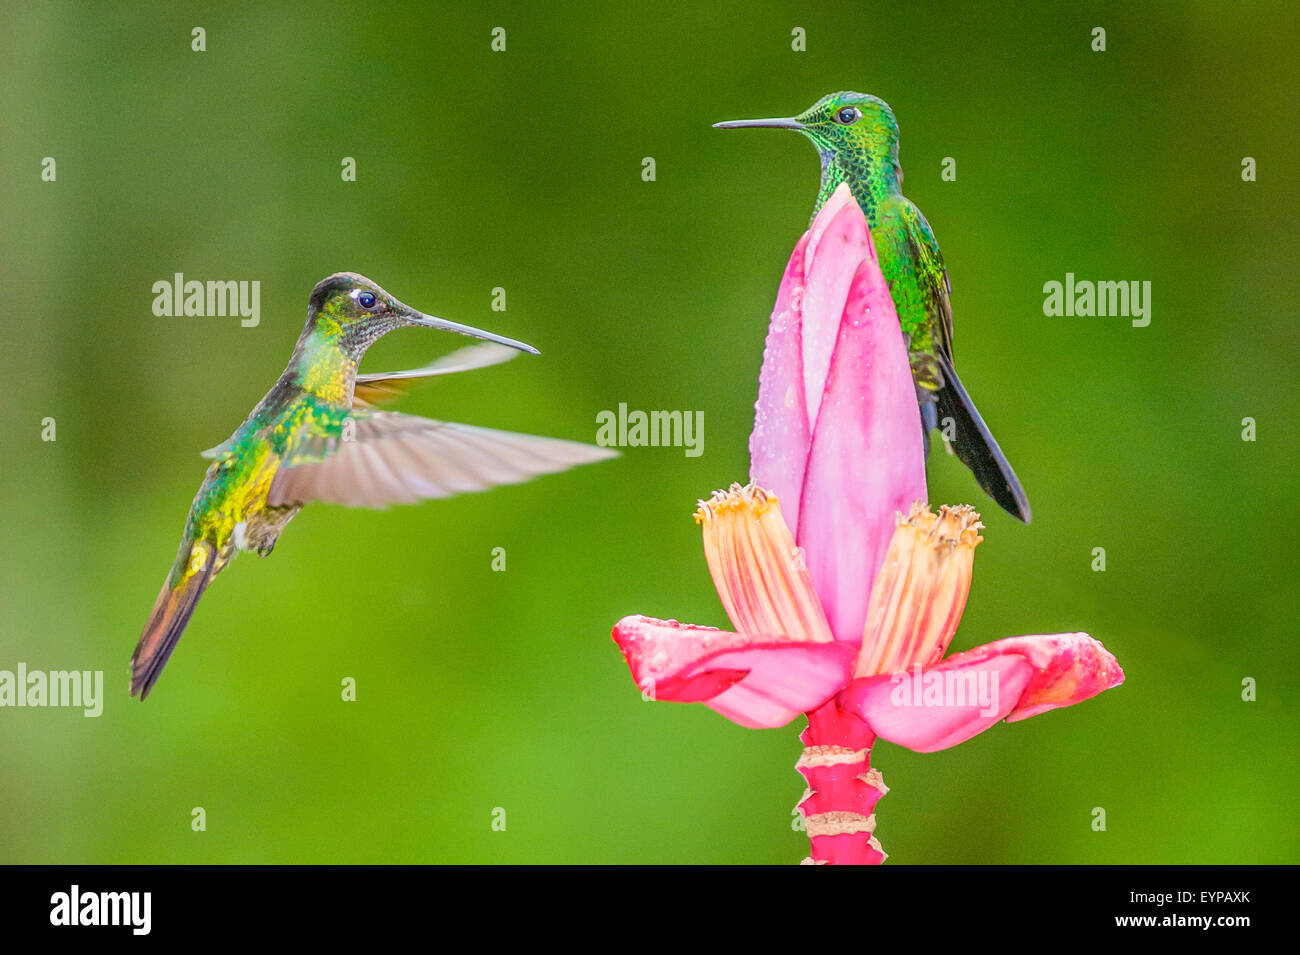 A Green-Crowned Brilliant Hummingbird hovering near a Banana flower Stock Photo